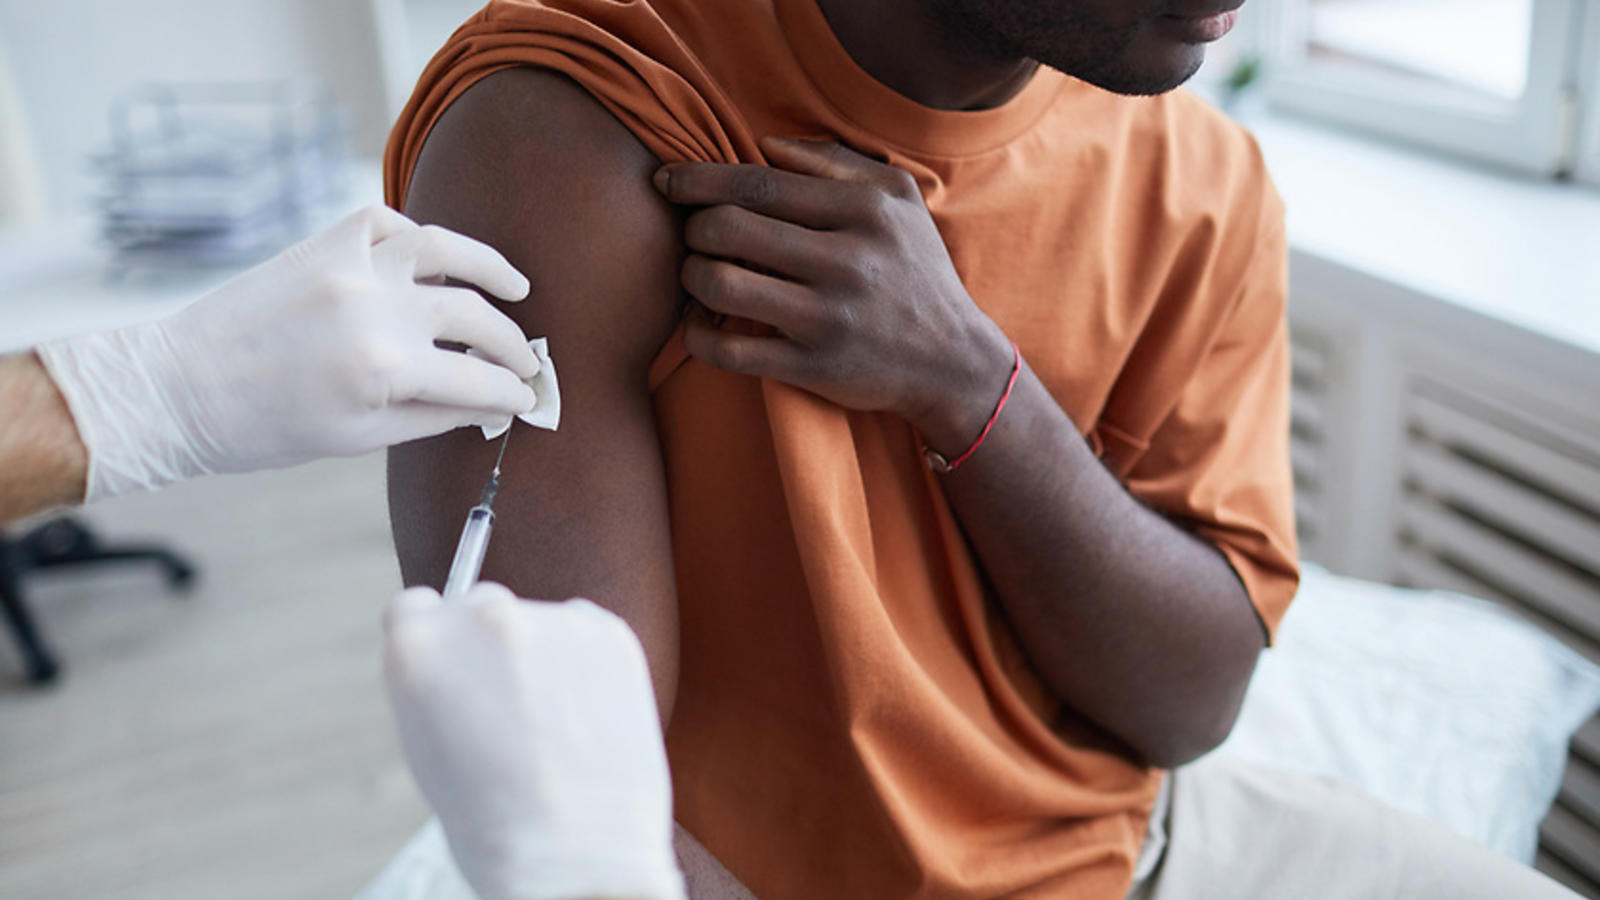 Man receiving a vaccine injection